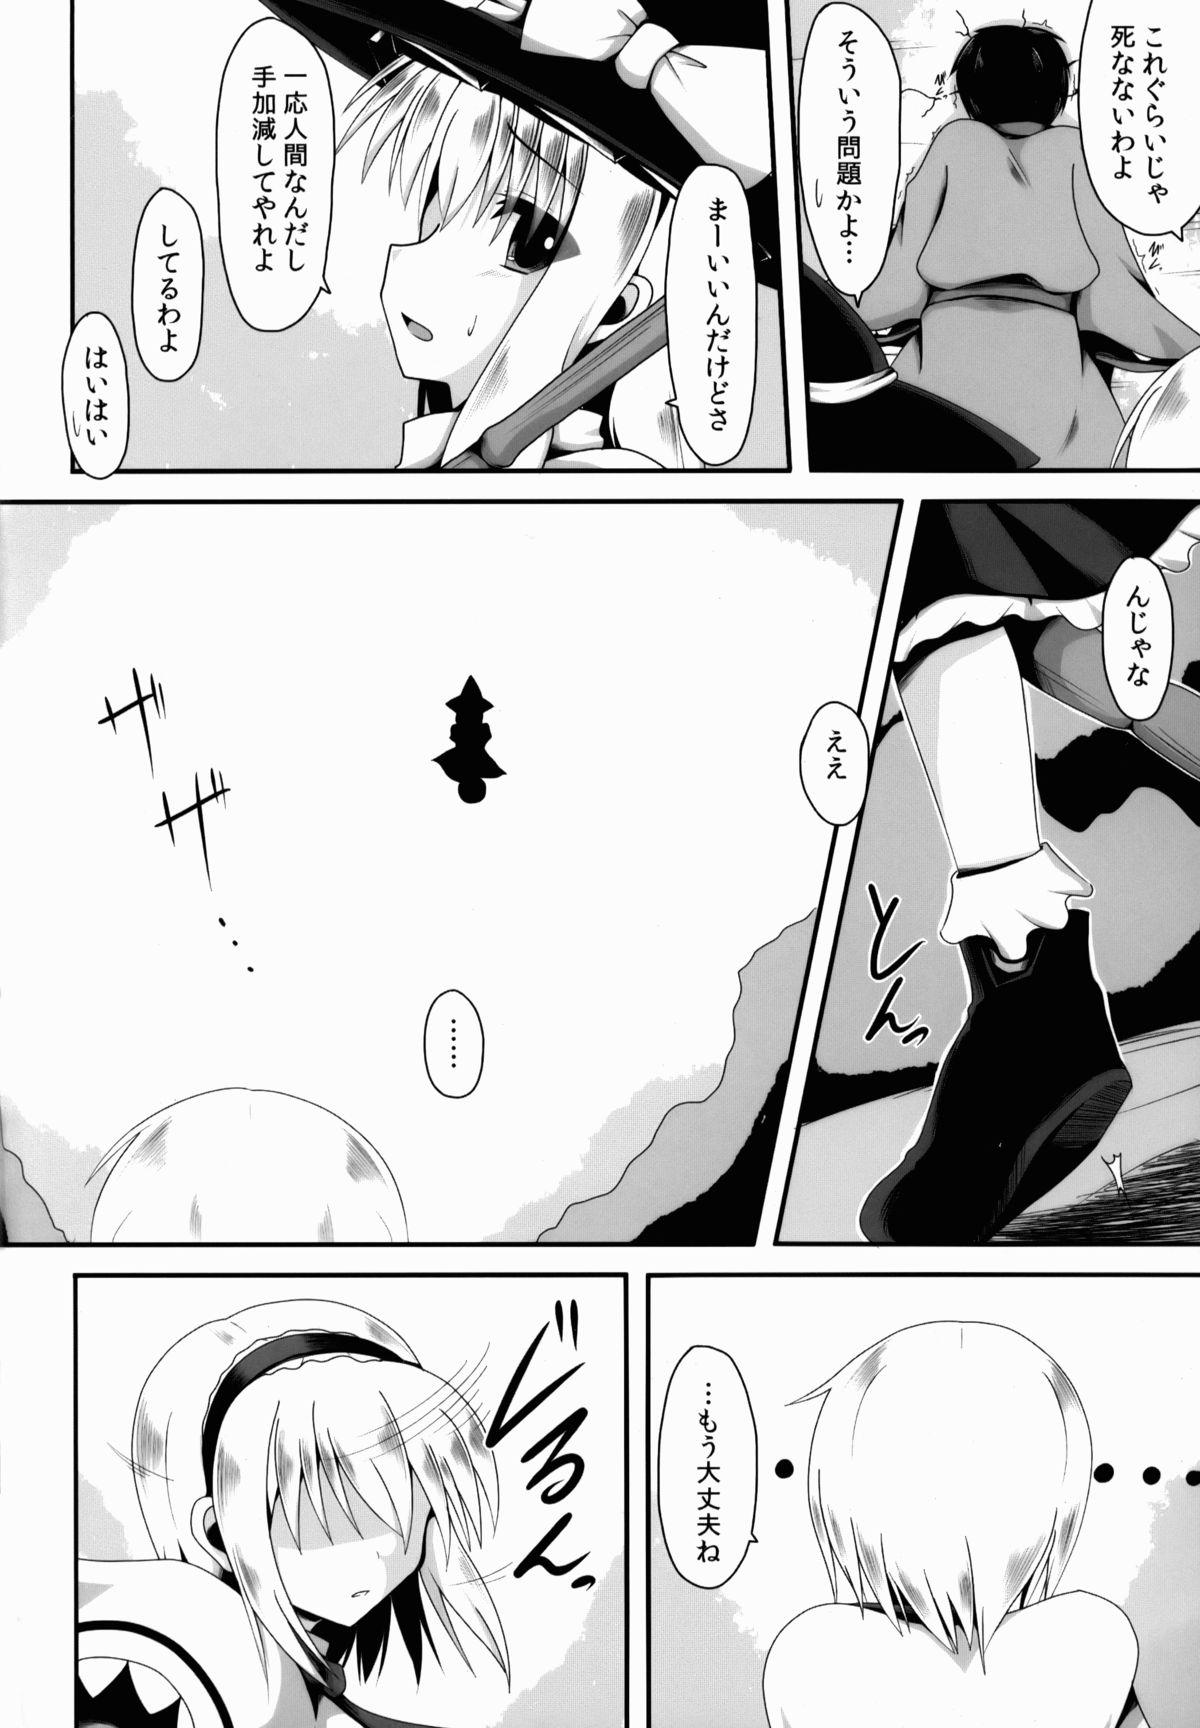 Caseiro Aidane 3 - Touhou project Submissive - Page 5